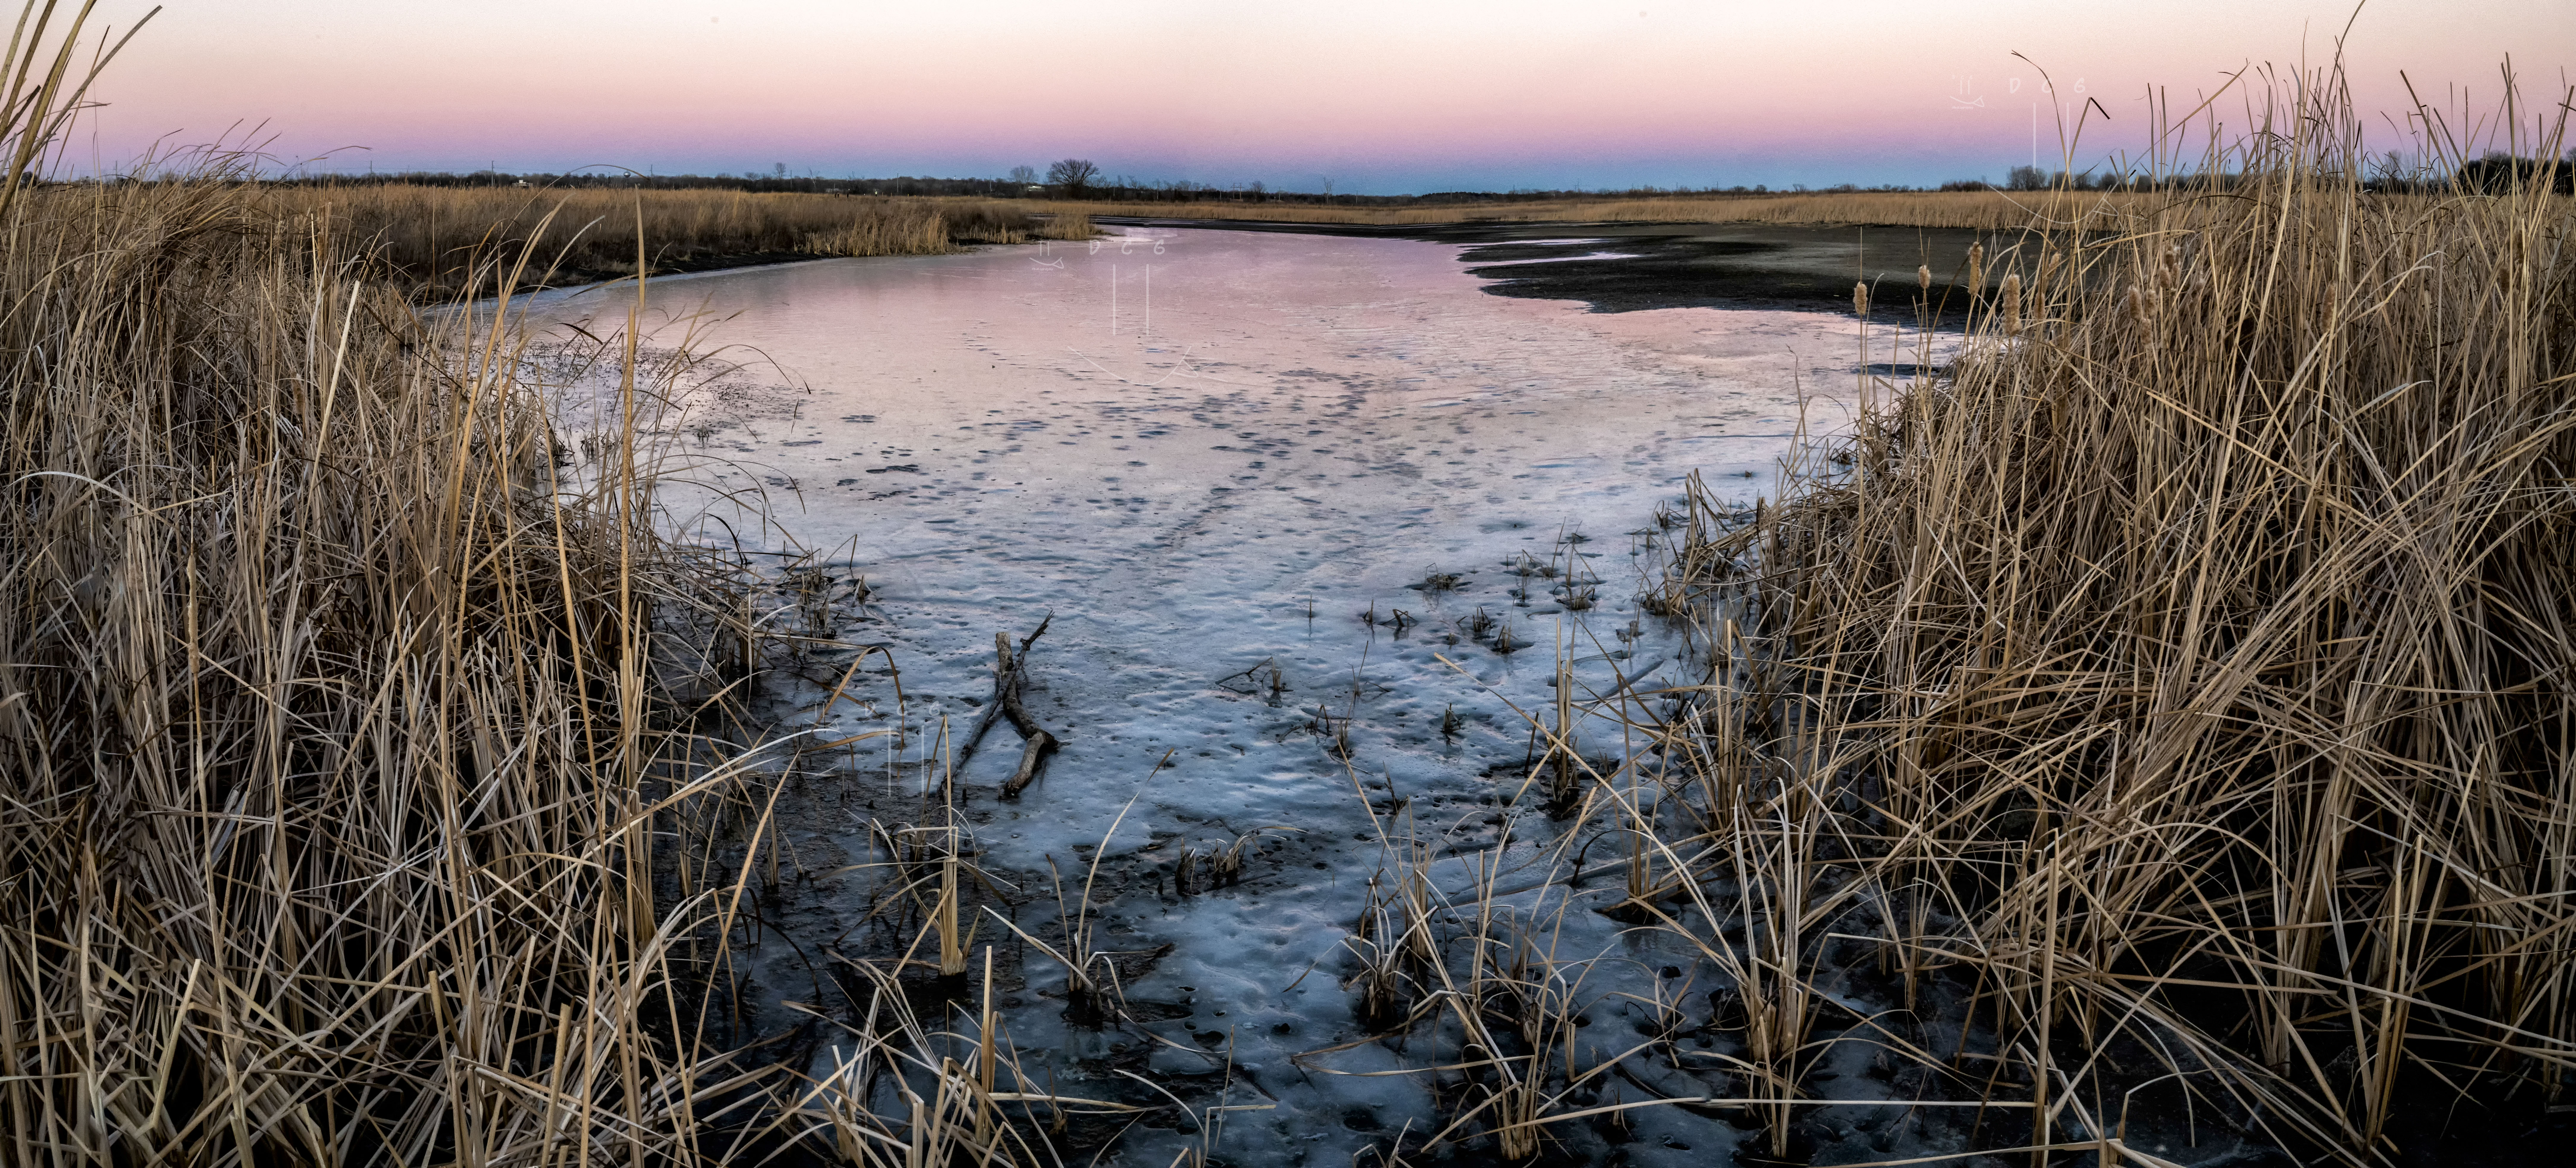 Shadow of sunset colors parted tallgrass frozen stream